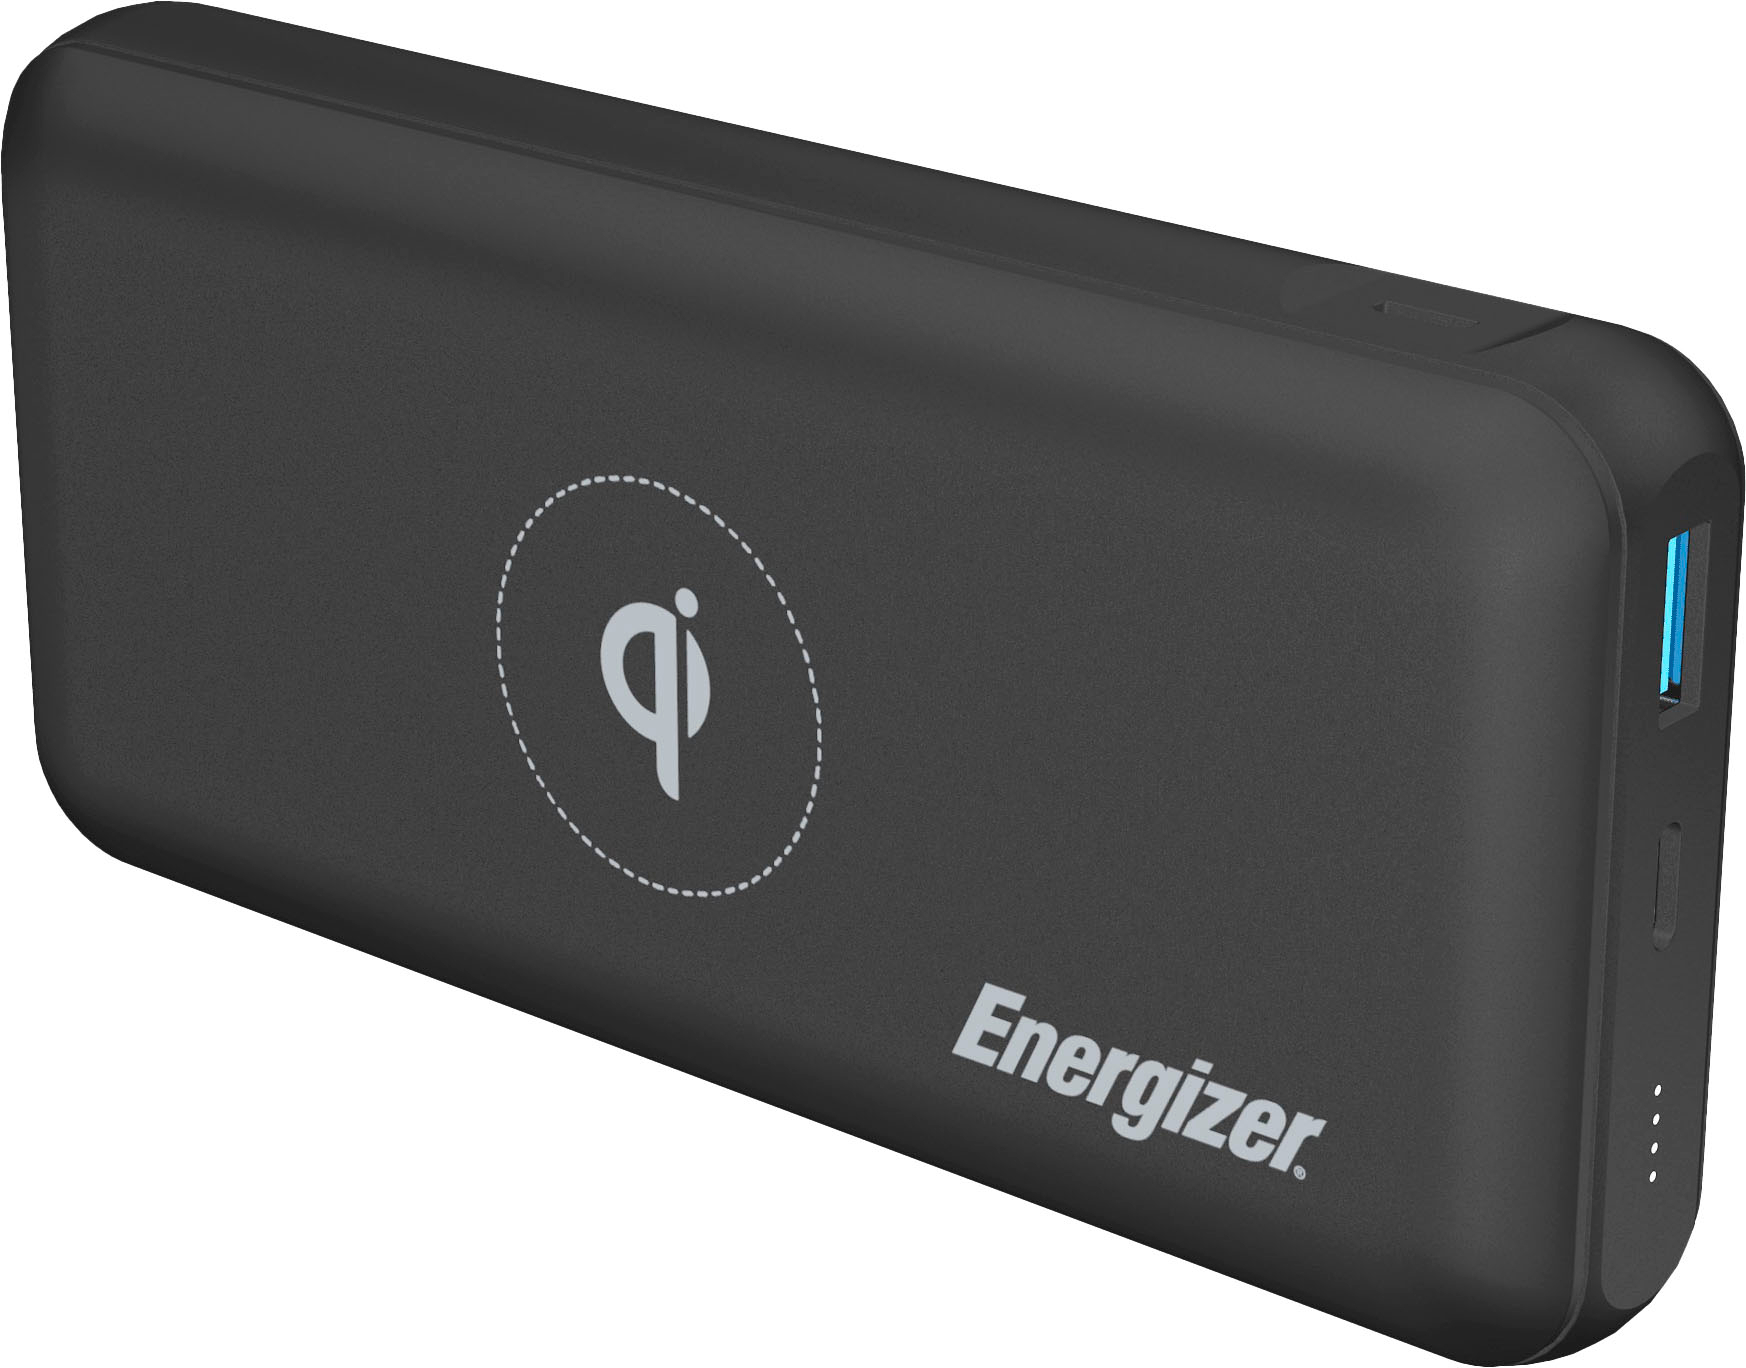 Angle View: Energizer - Ultimate Lithium 20,000mAh 20W Qi Wireless Portable Charger/Power Bank QC 3.0 & PD 3.0 for Apple, Android, USB Devices - Black